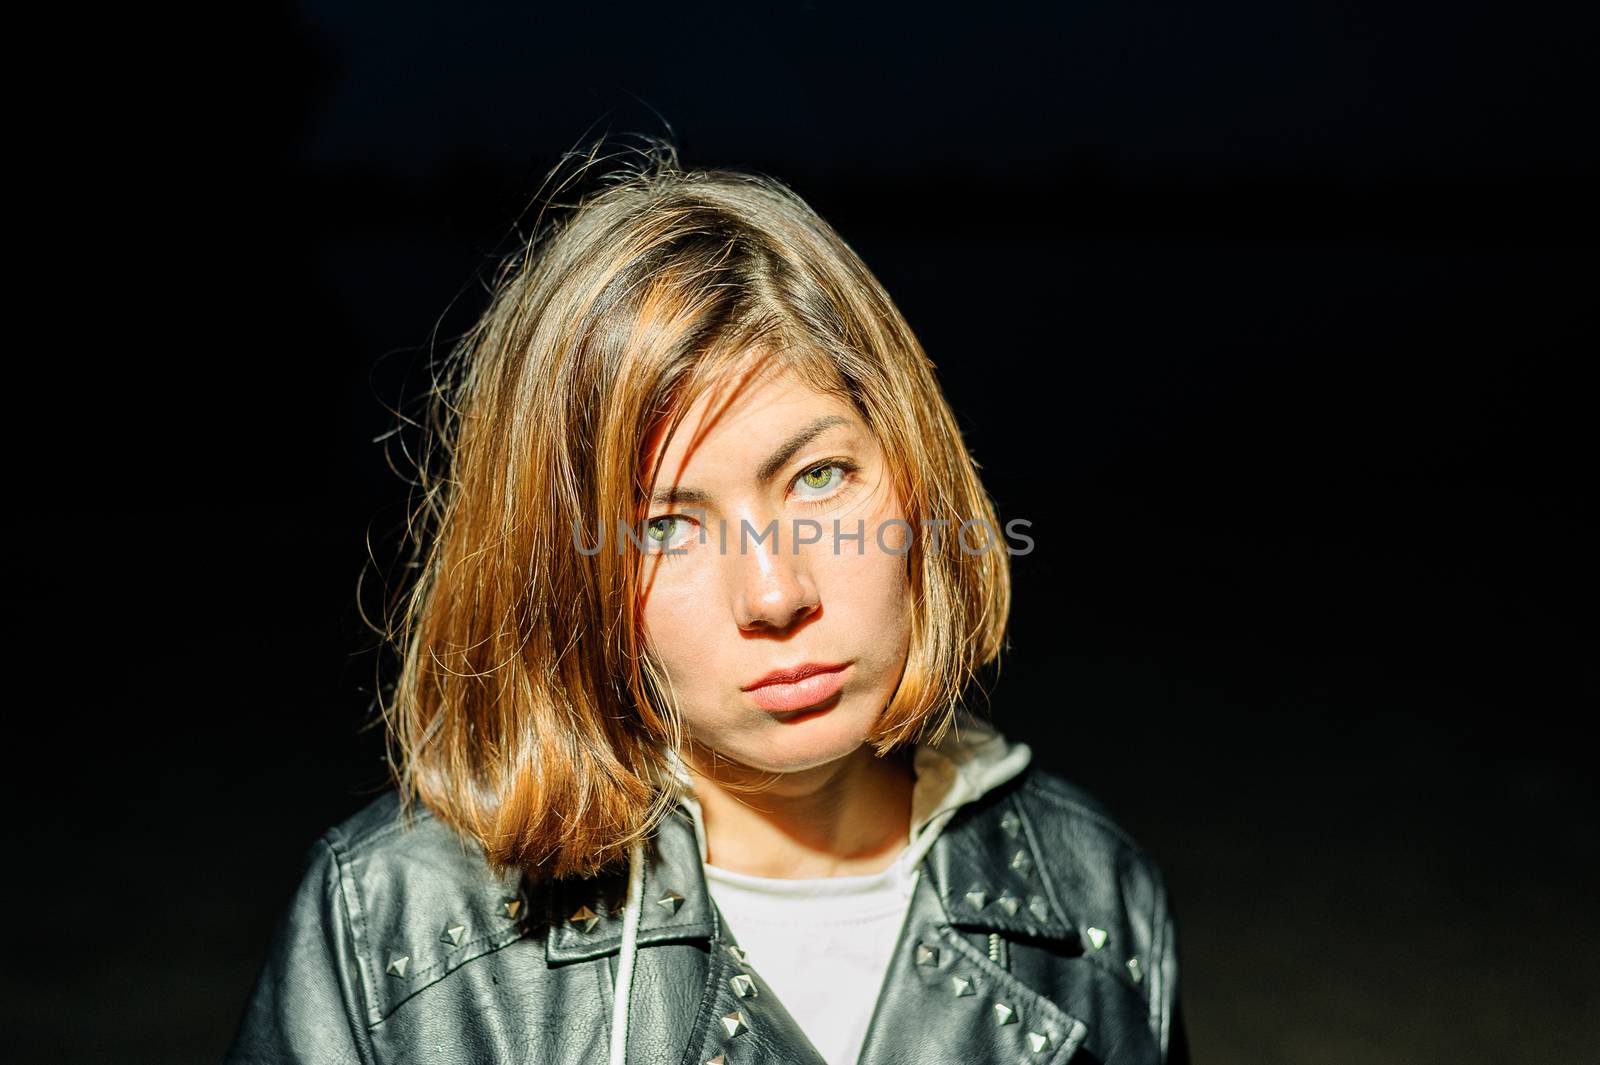 girl with a serious face in a leather jacket on a black background by chernobrovin